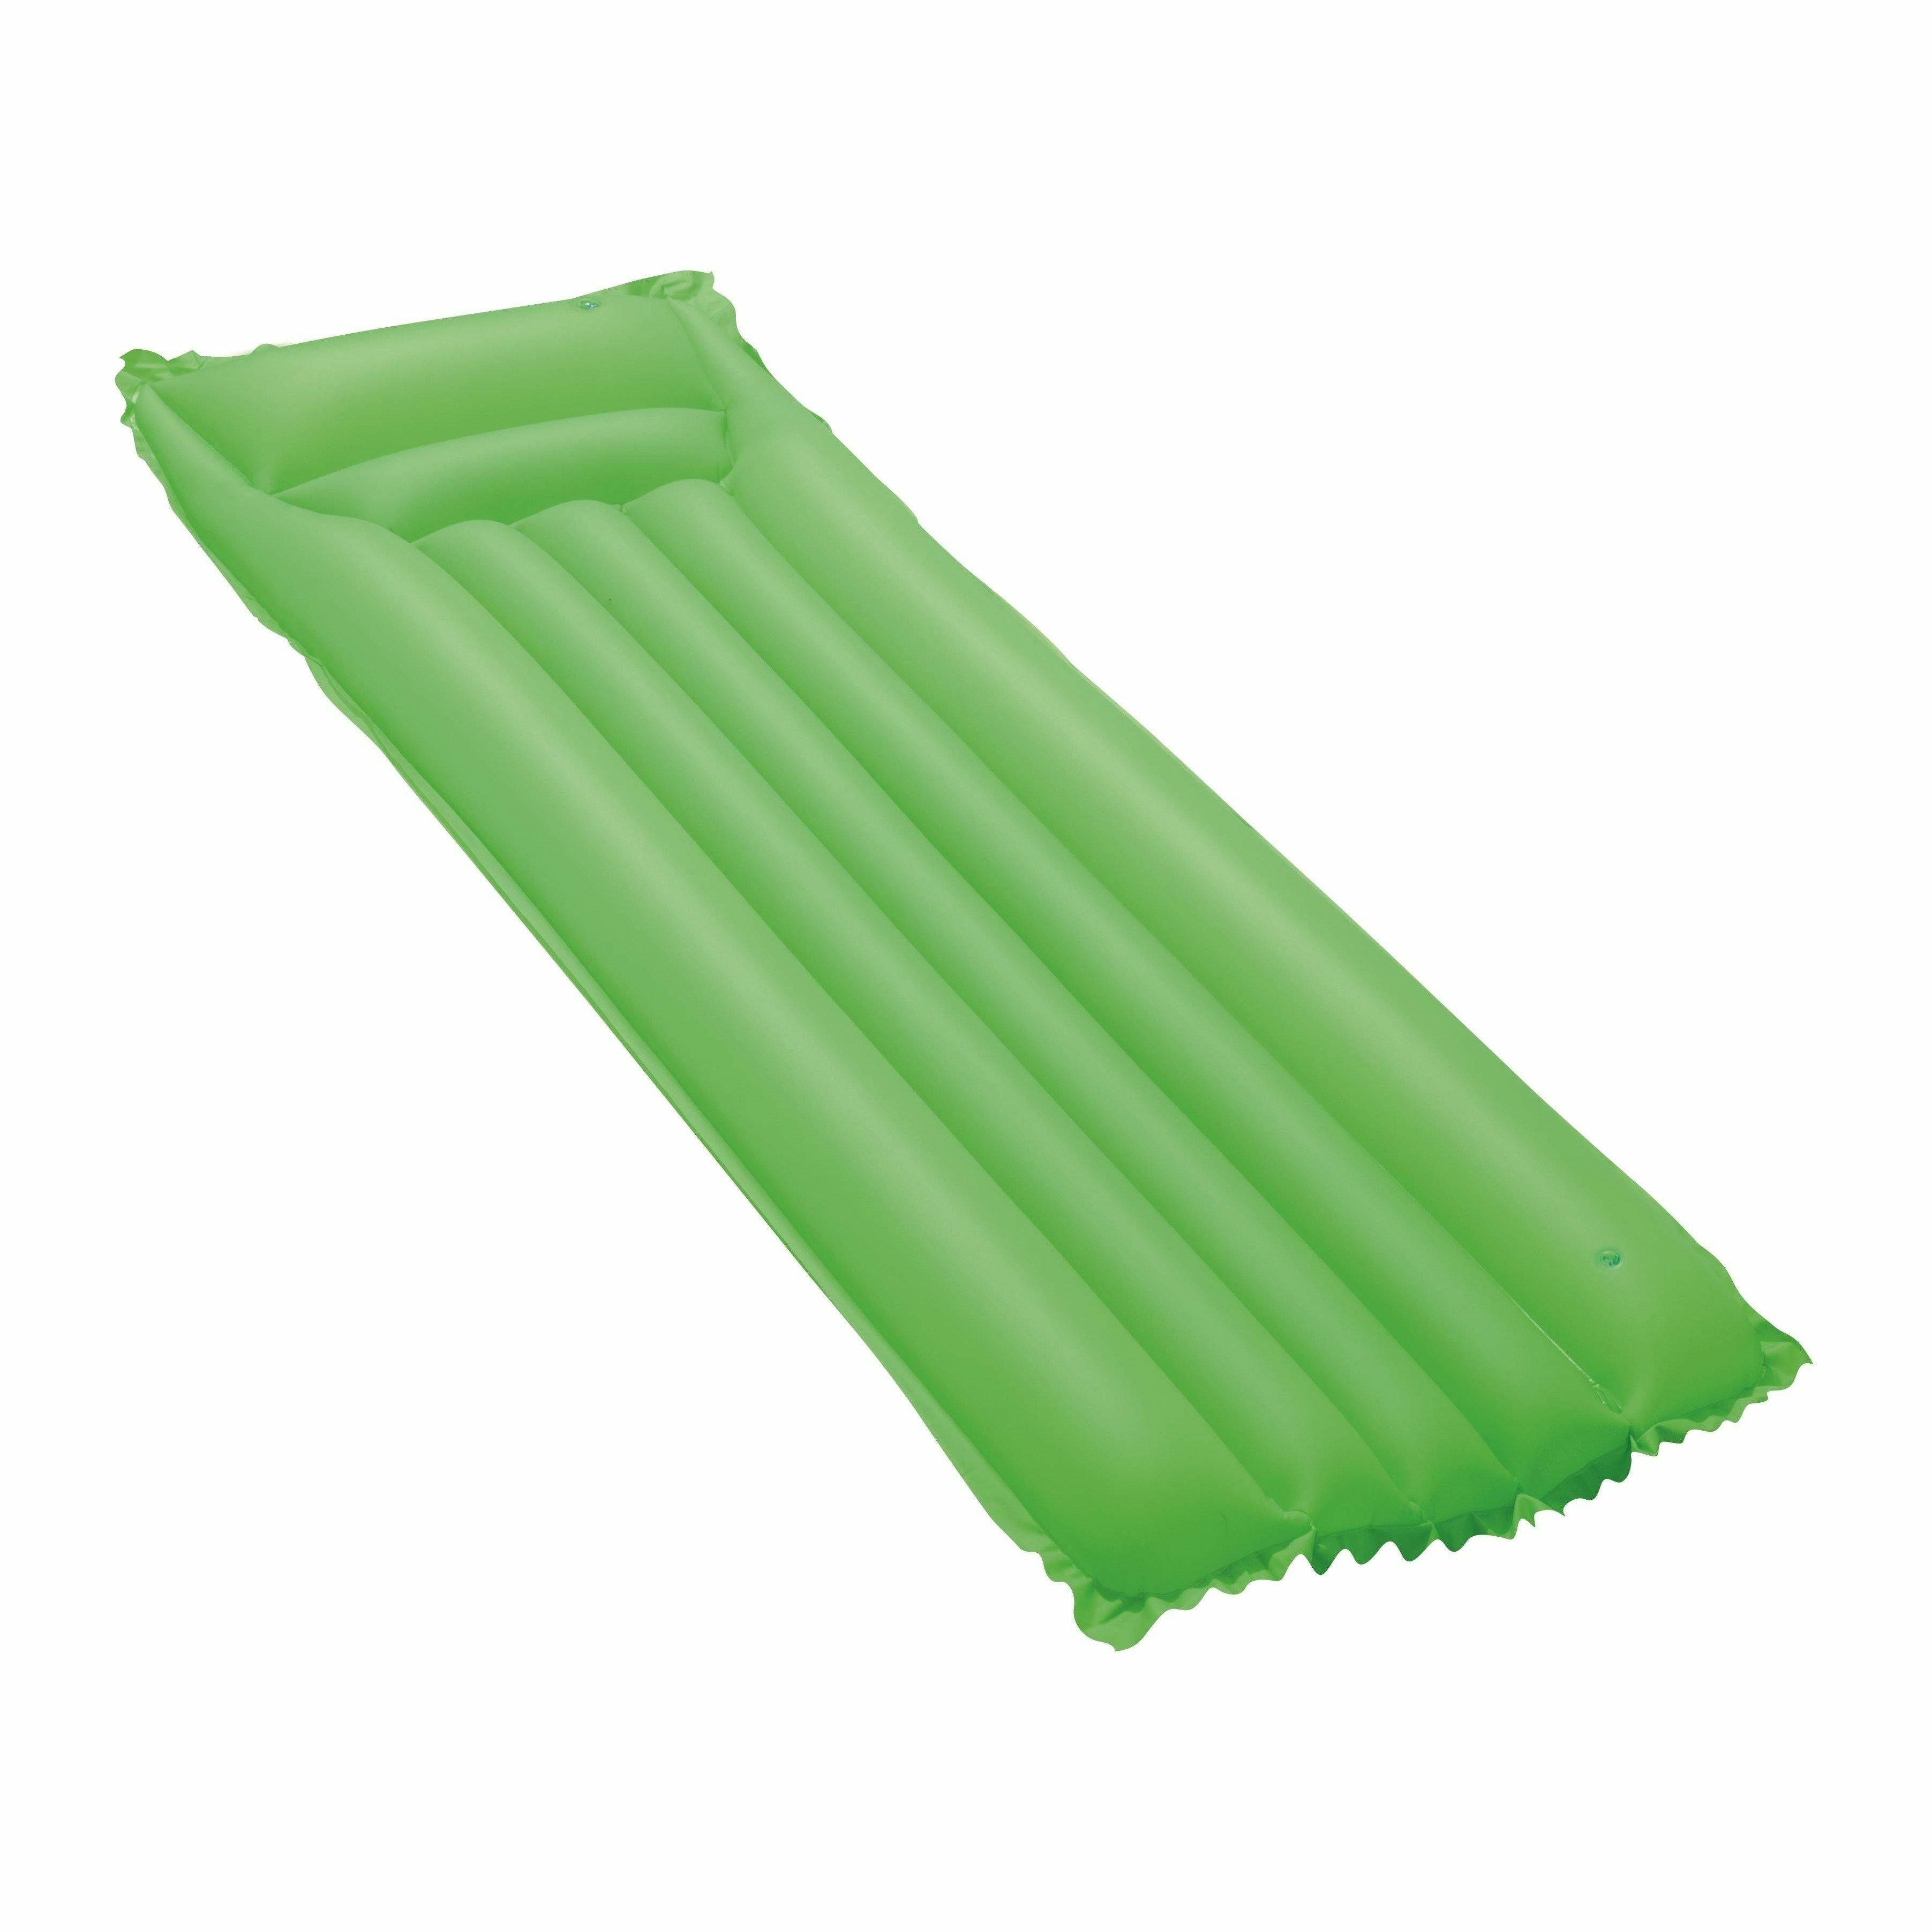 Bestway 44007 Matte Finish Air Mat 1.83m x 69cm - Green - BumbleToys - 5-7 Years, Boys, Eagle Plus, Floaters, Girls, Inflatables, Sand Toys Pools & Inflatables